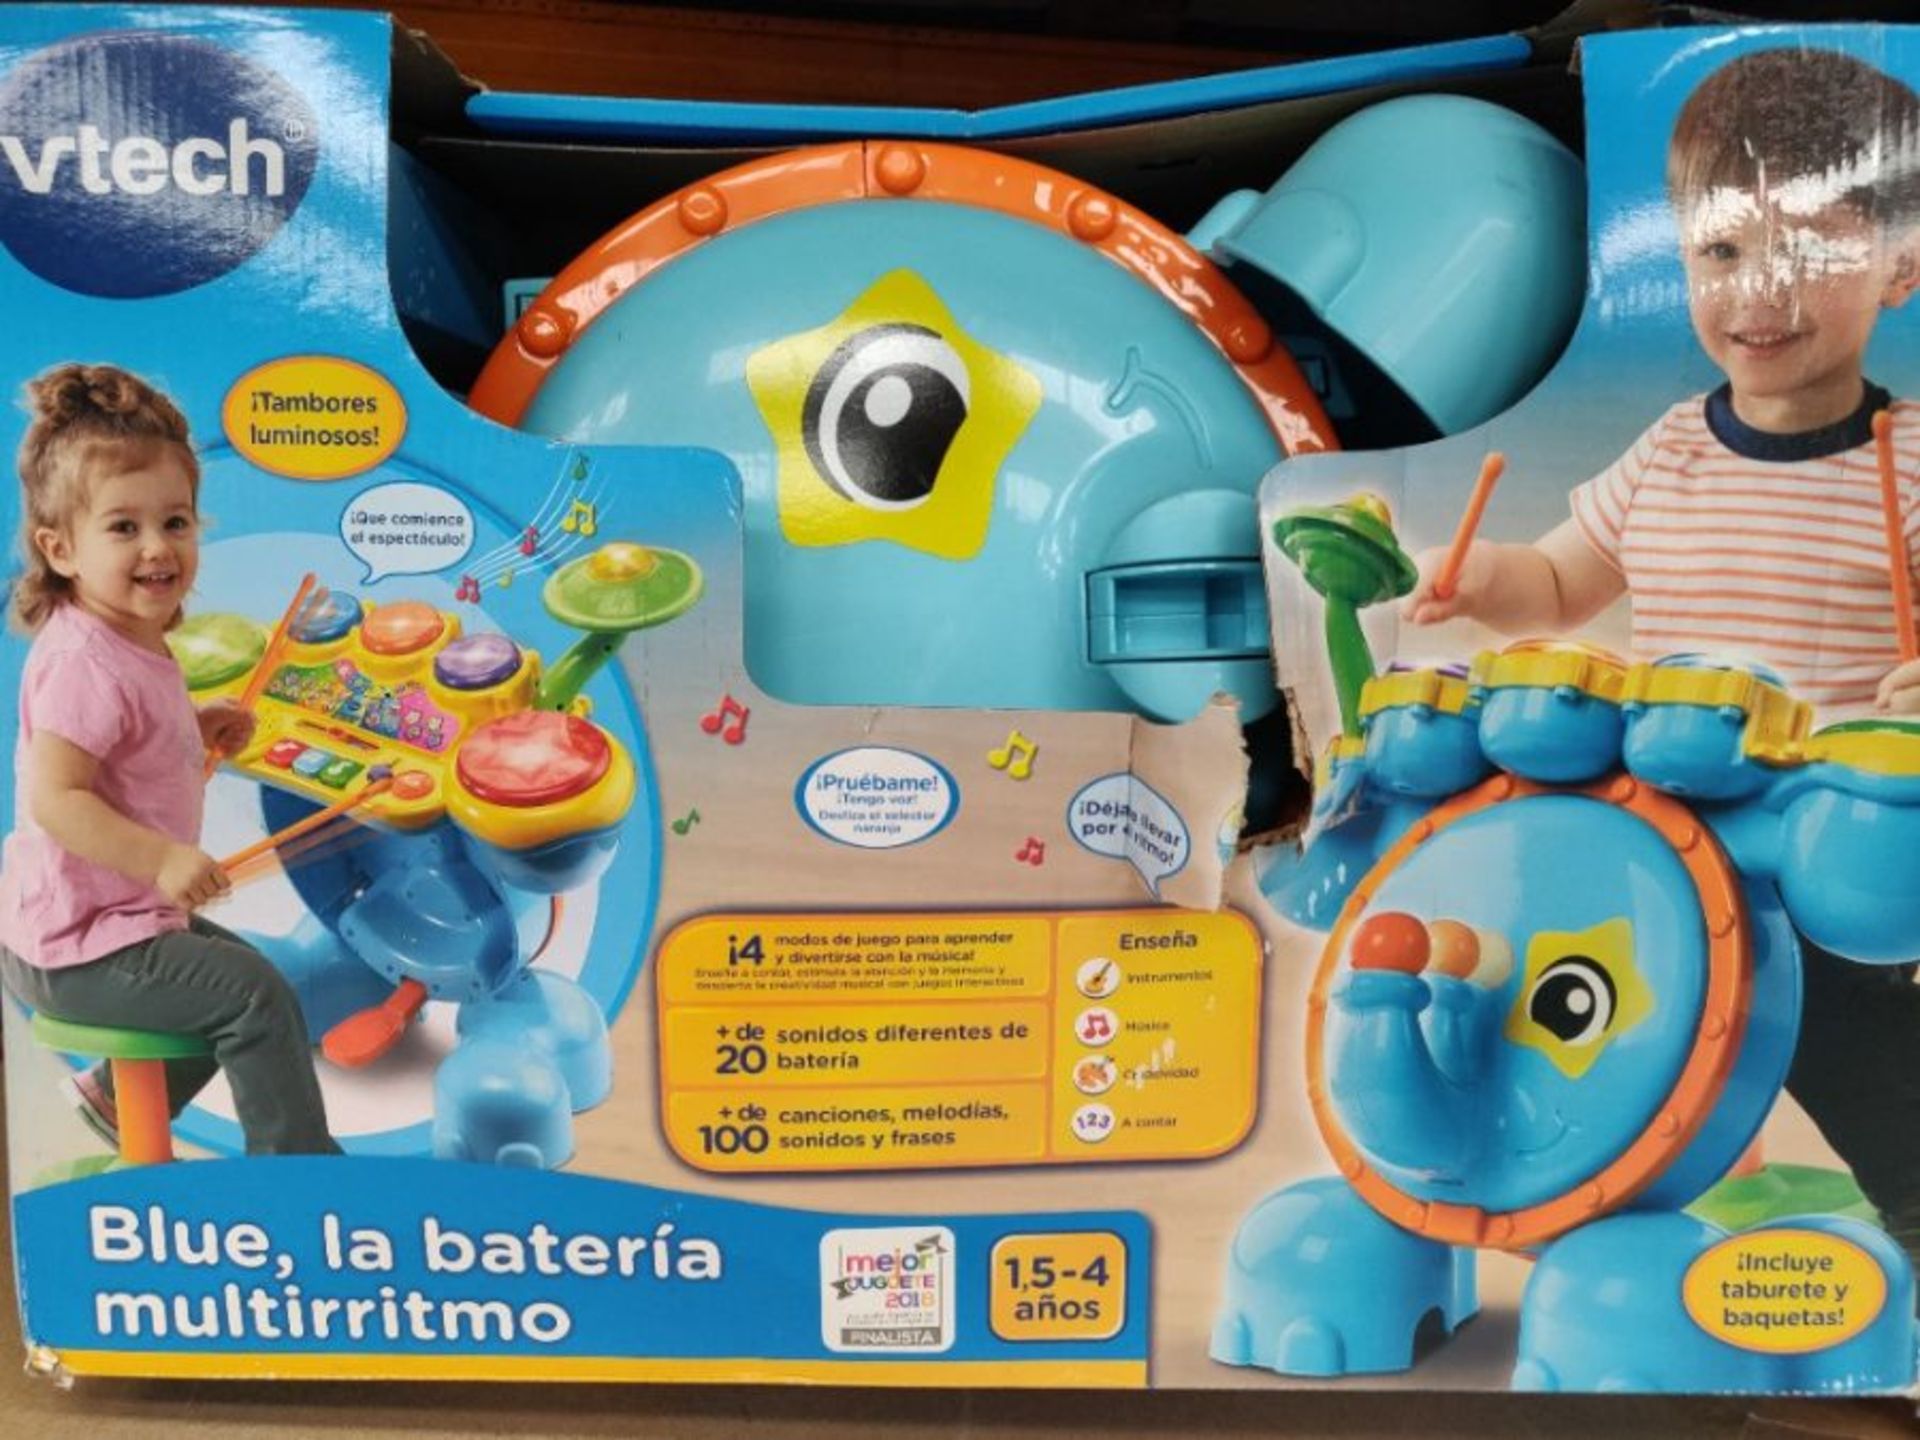 VTech Blue la Batería Multirritmo Interactive Learning Music, with Activities That En - Image 2 of 3